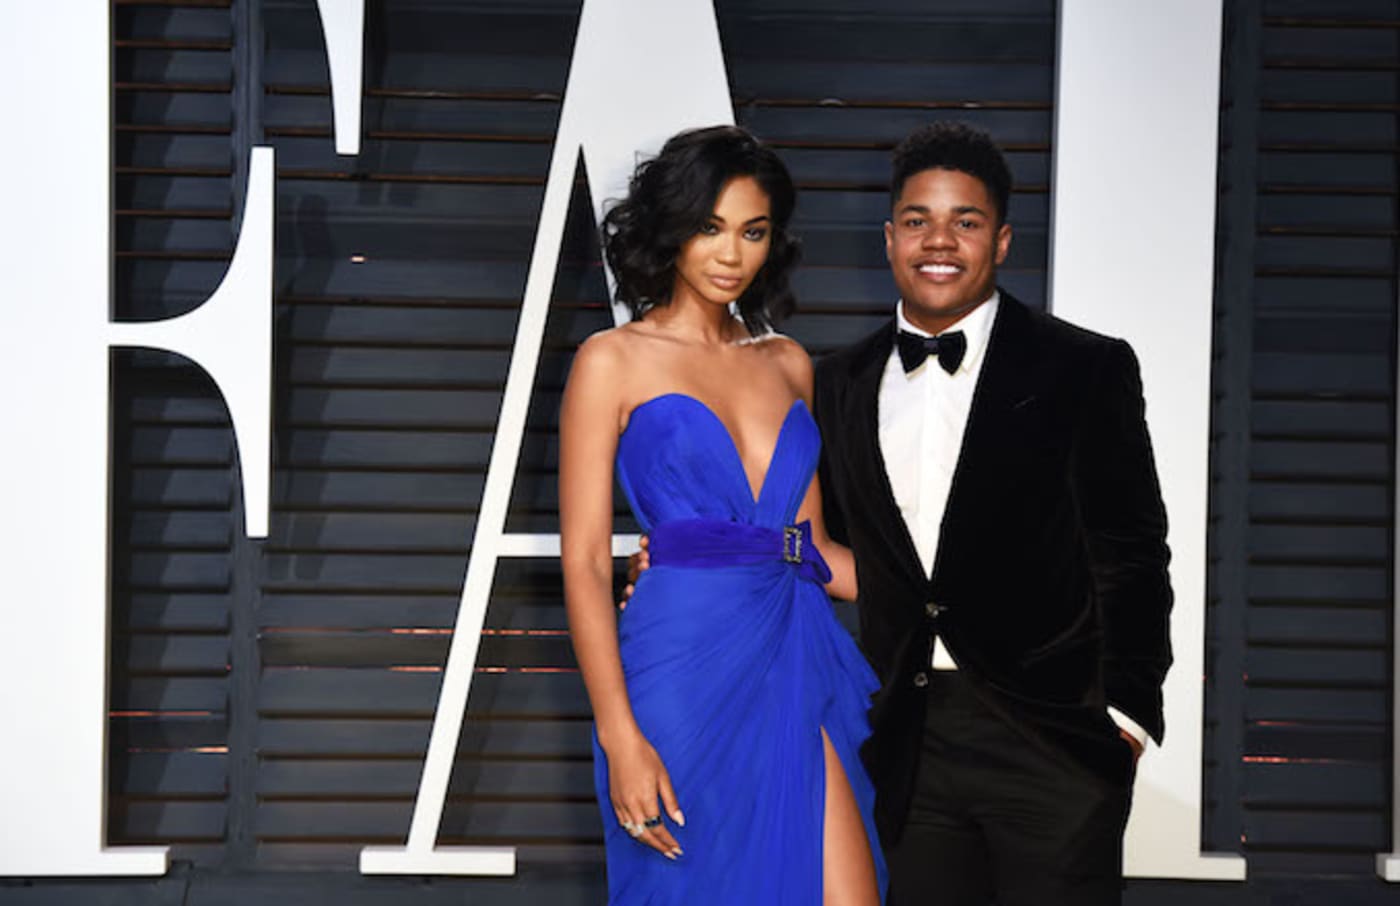 Chanel Iman and Sterling Shepard